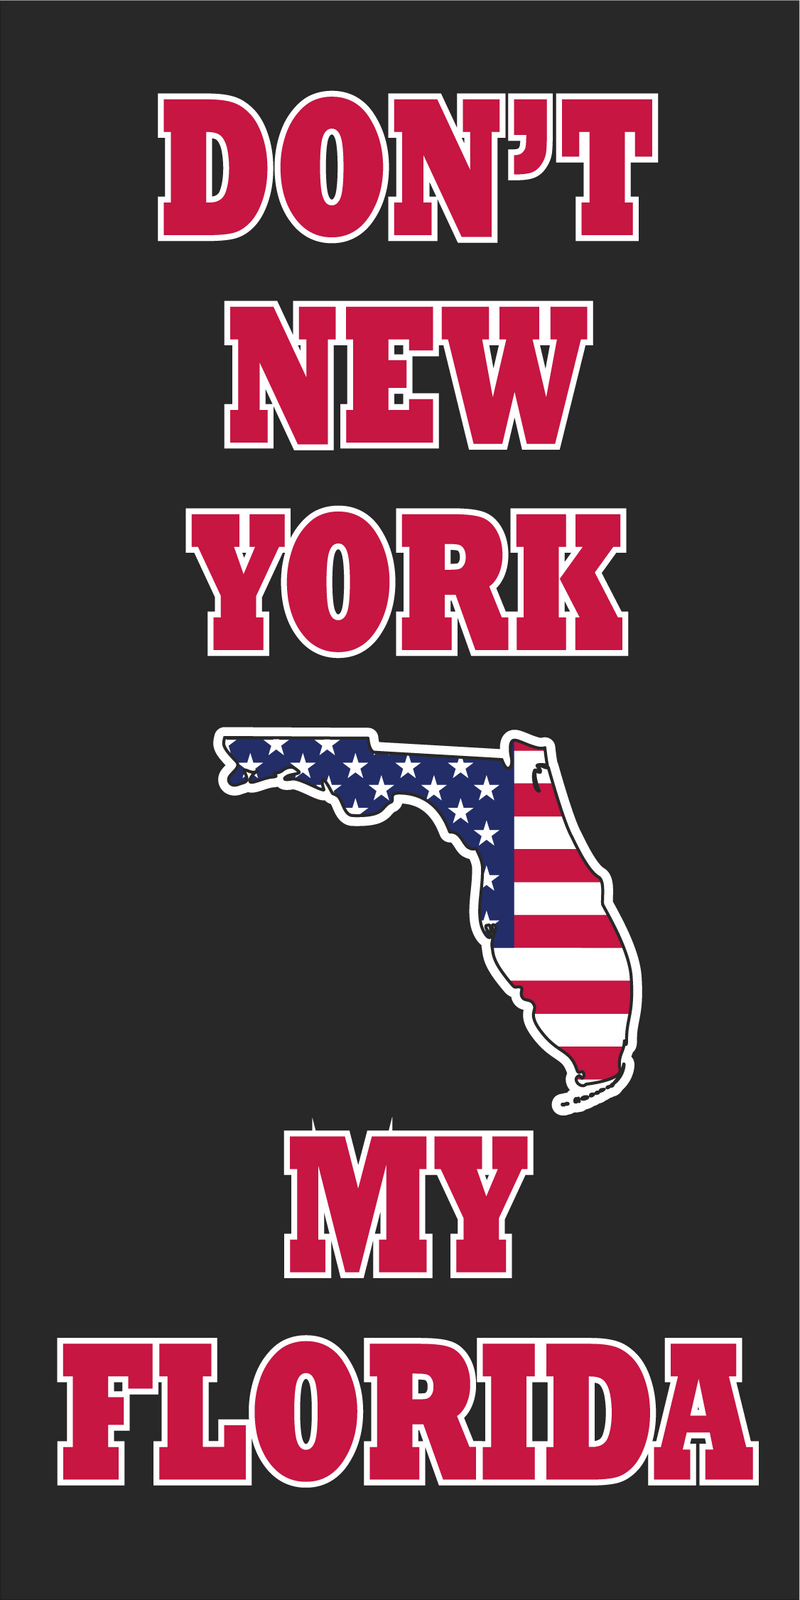 DON'T NEW YORK MY FLORIDA BLACK Bumper Sticker Made in USA American Flag